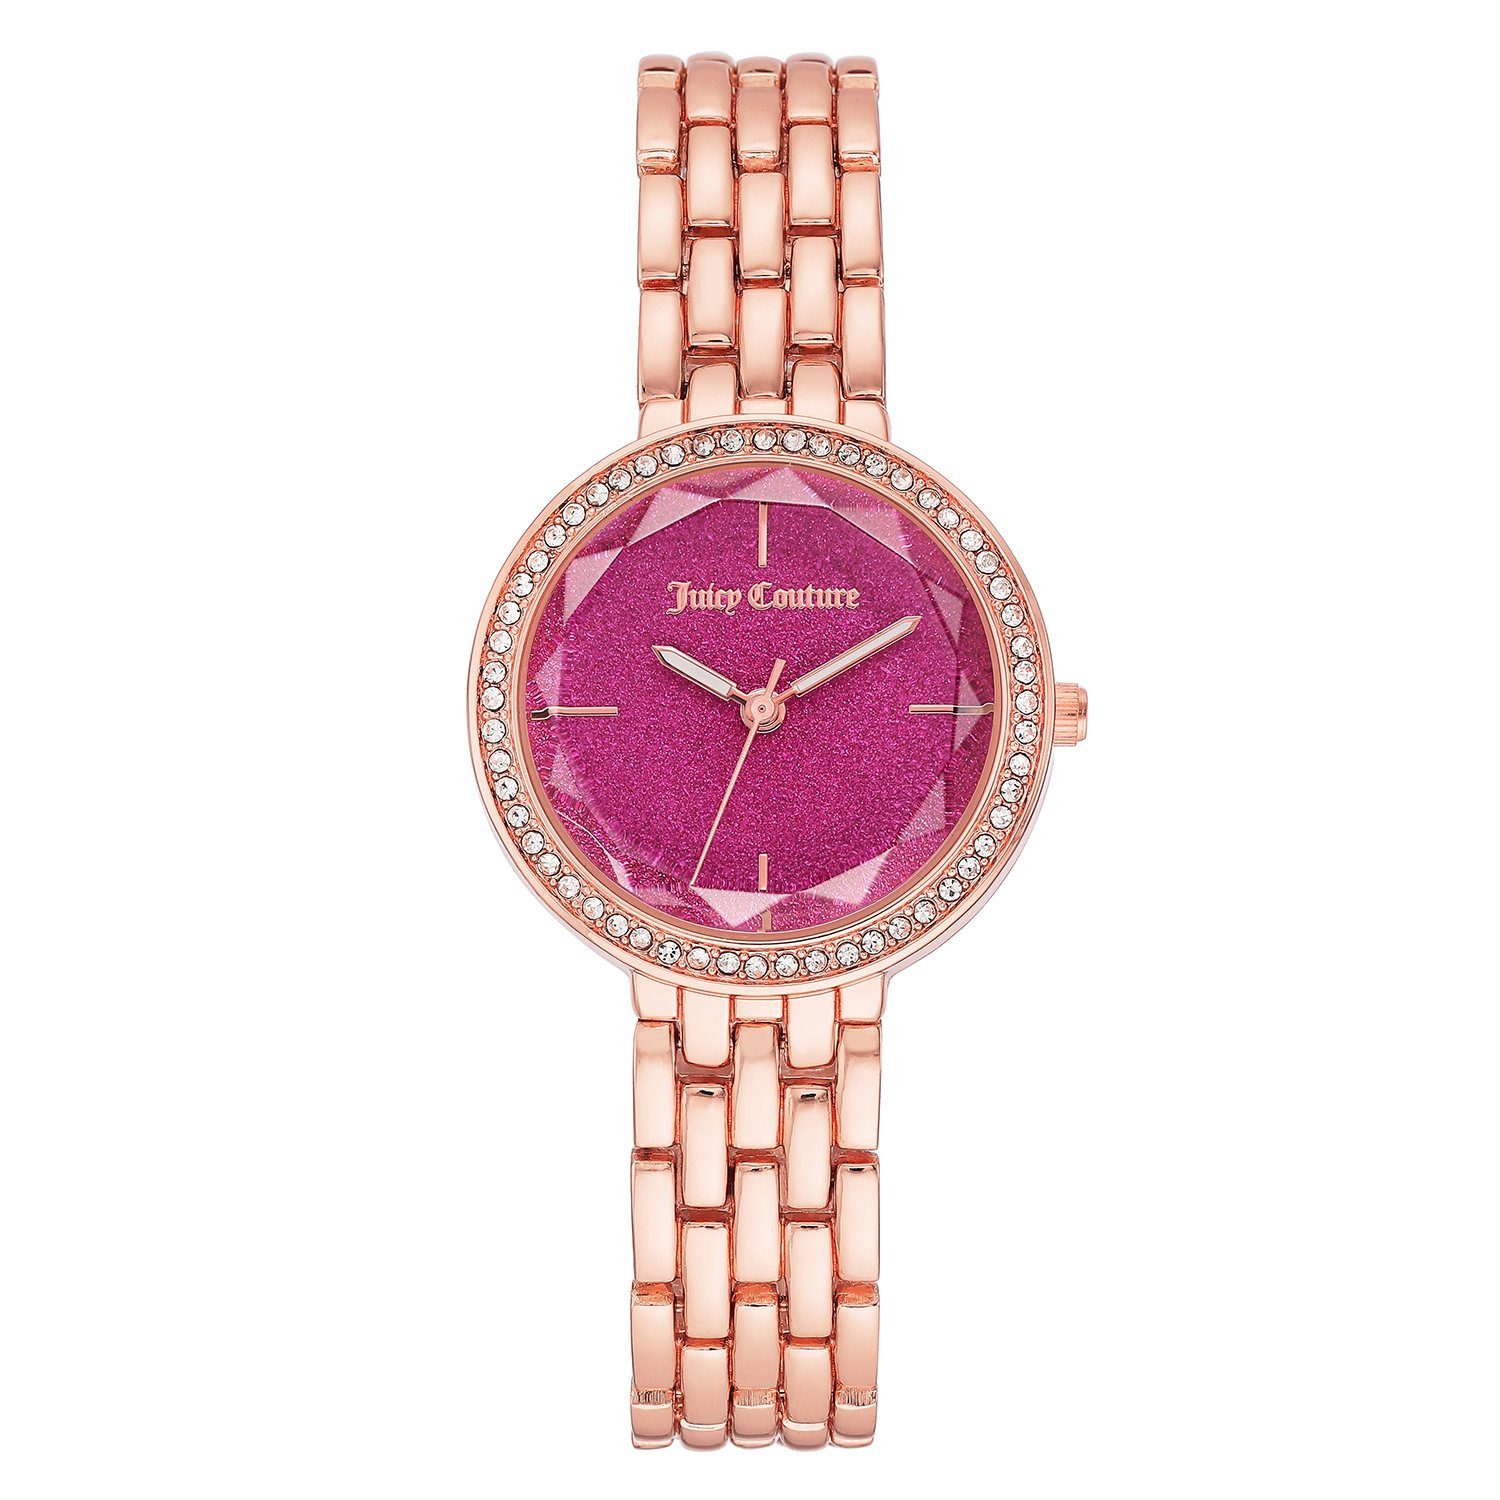 Juicy Couture Digitaluhr JC/1208HPRG